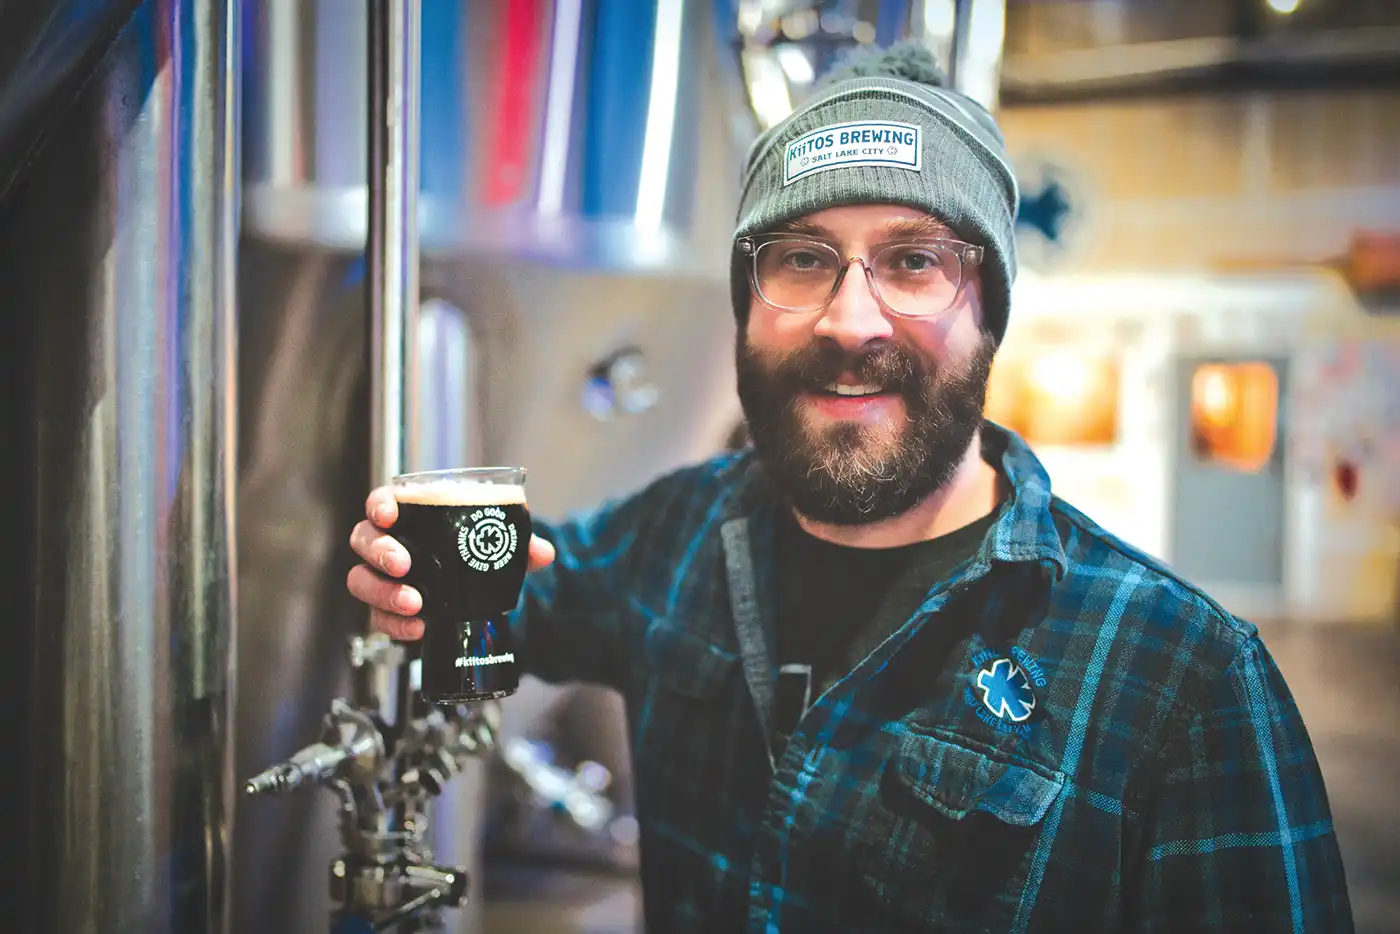 “I hope SLC embraces a well-crafted ‘table’ beer soon, because I’m certainly going to make one,” says Clay Turnbow, Head Brewer at Kiitos Brewing.